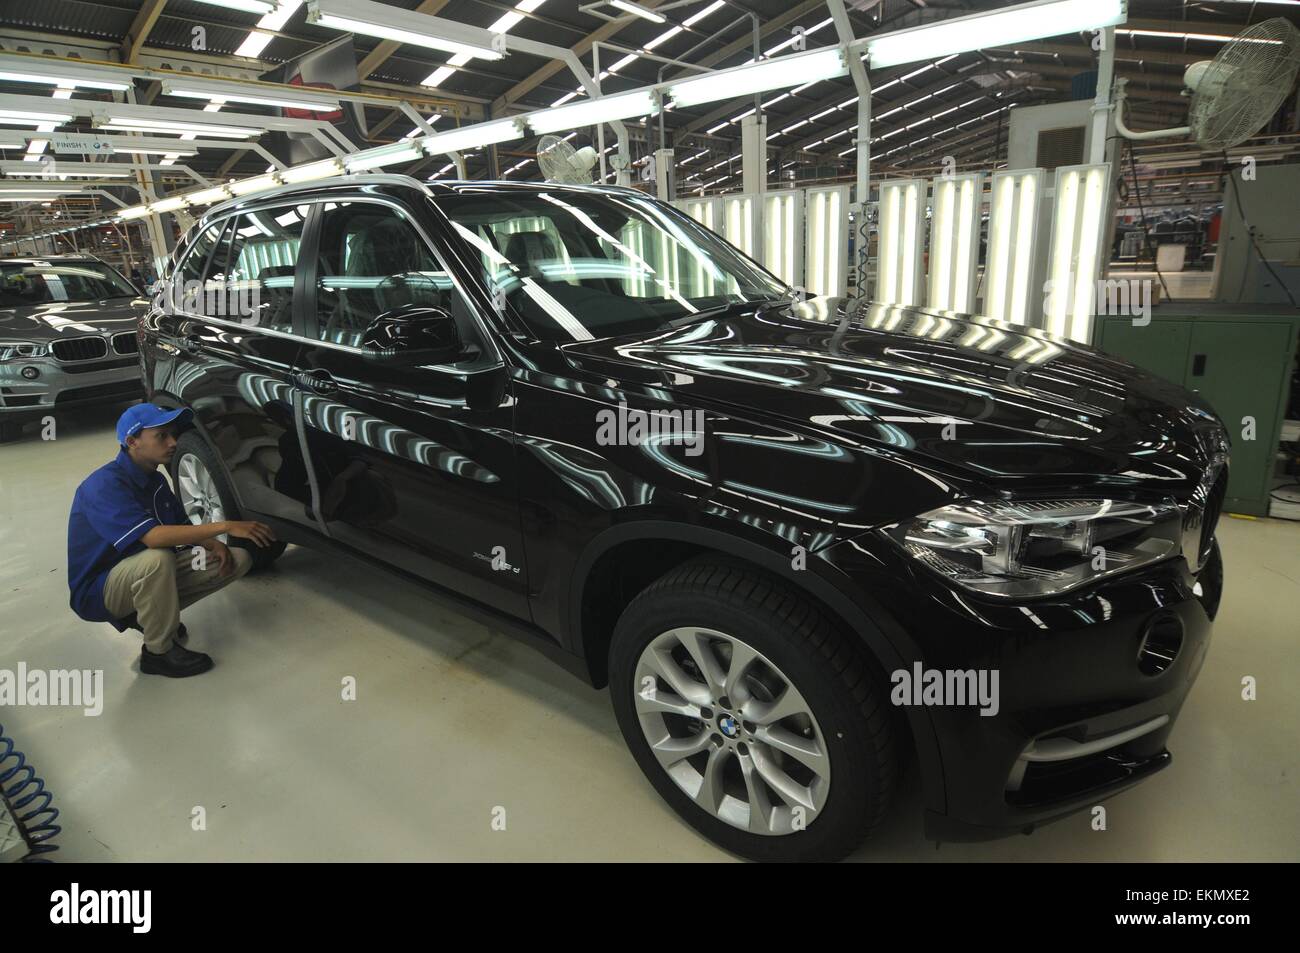 Jakarta, Indonesia2. 10th Apr, 2015. JAKARTA, INDONESIA - APRIL 13 : Workers assemble the third generation of BMW X5 Advance Diesel automobile on the production line at the Bayerische Motoren Werke (BMW) factory on April 10, 2015 in Jakarta, Indonesia. © Sijori Images/ZUMA Wire/Alamy Live News Stock Photo